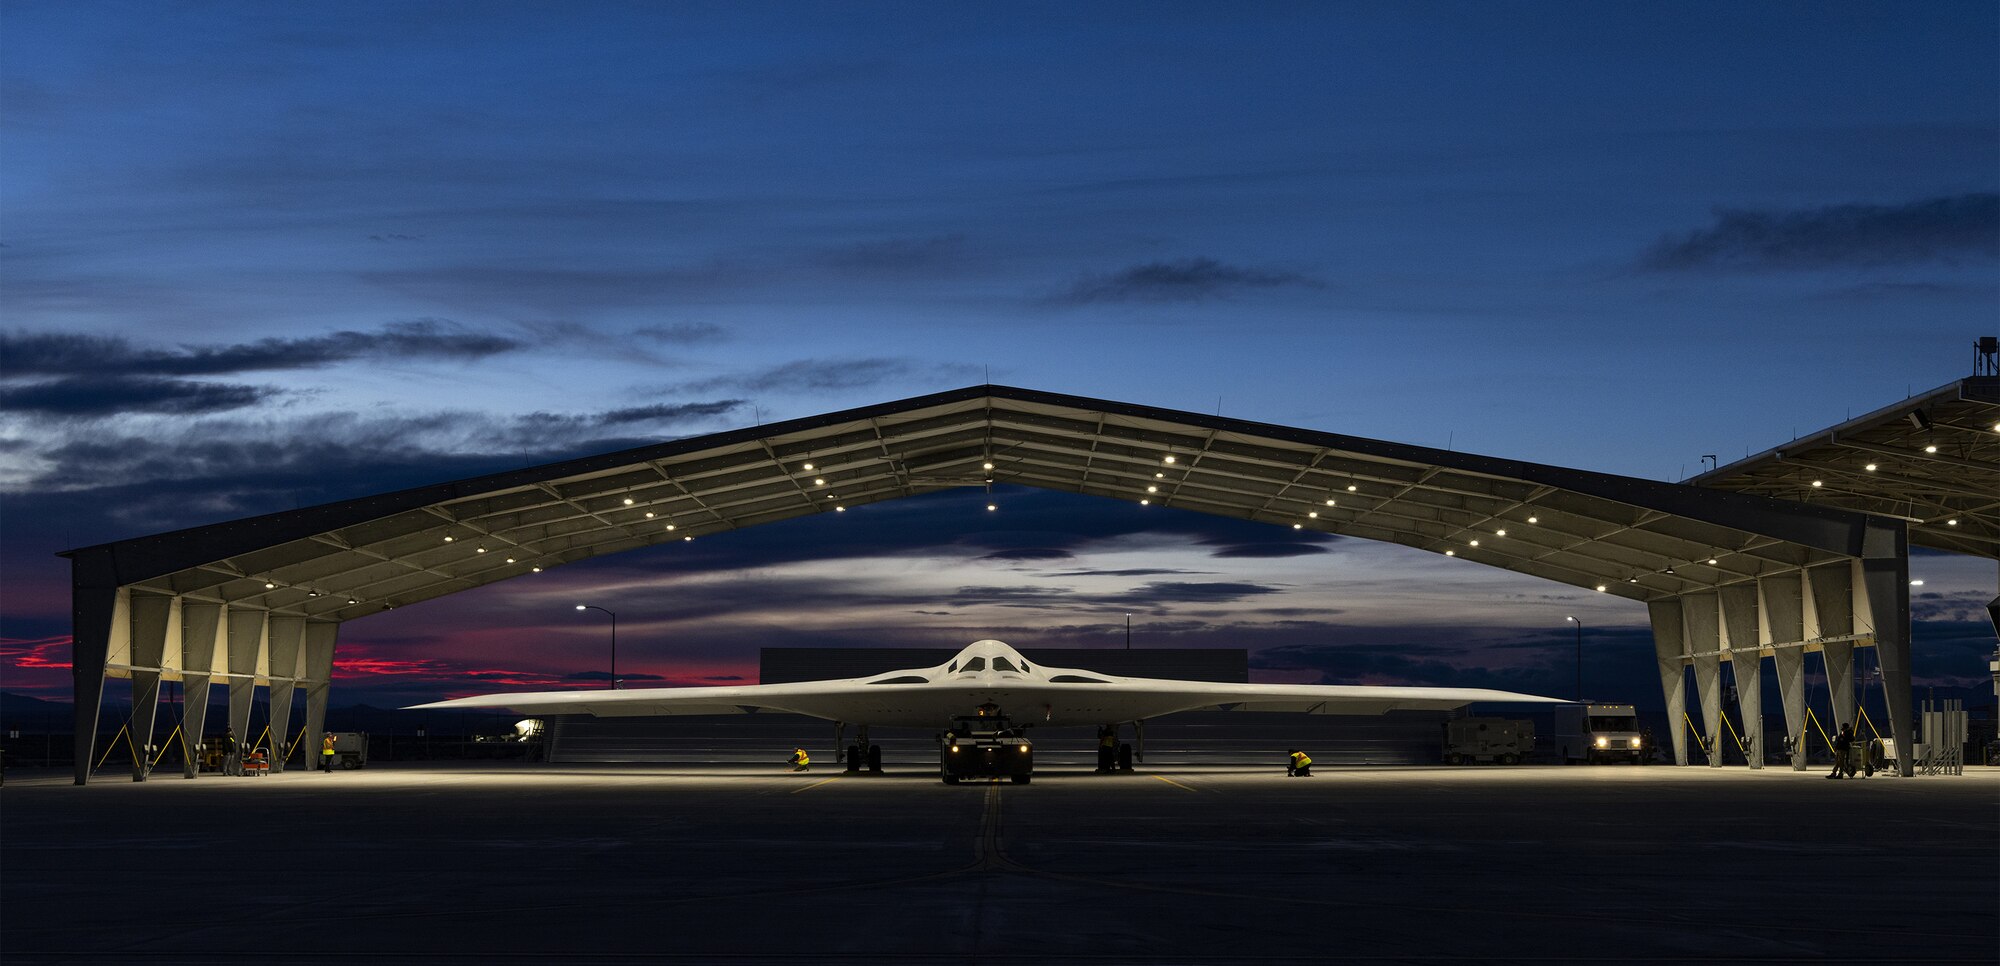 B-21 Raider program is on track and continues flight testing